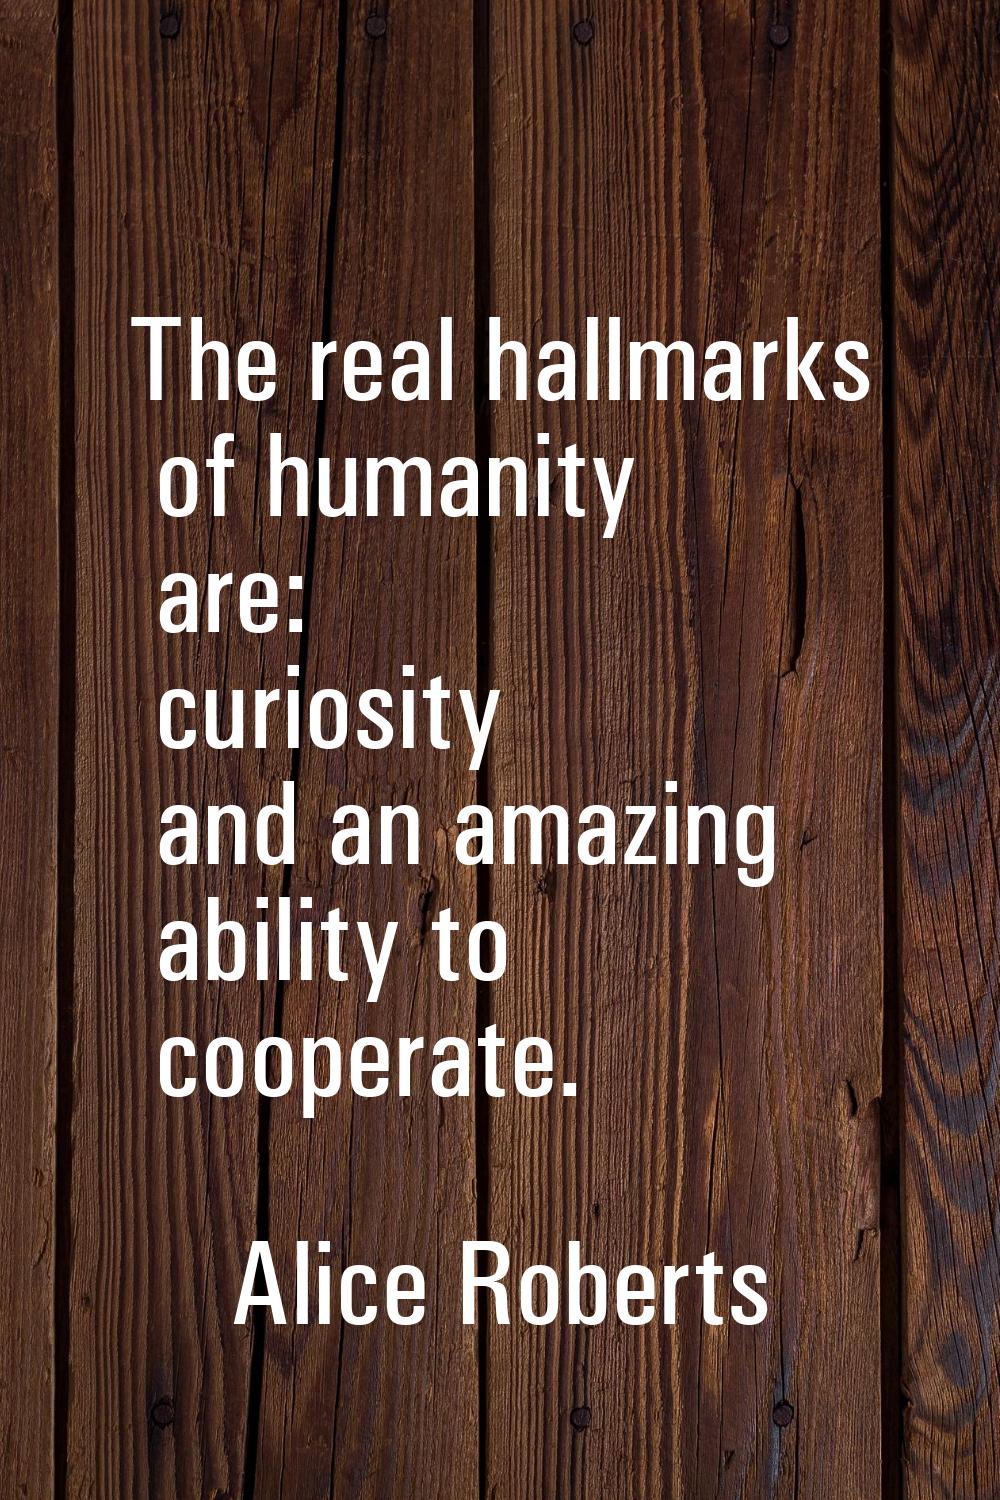 The real hallmarks of humanity are: curiosity and an amazing ability to cooperate.